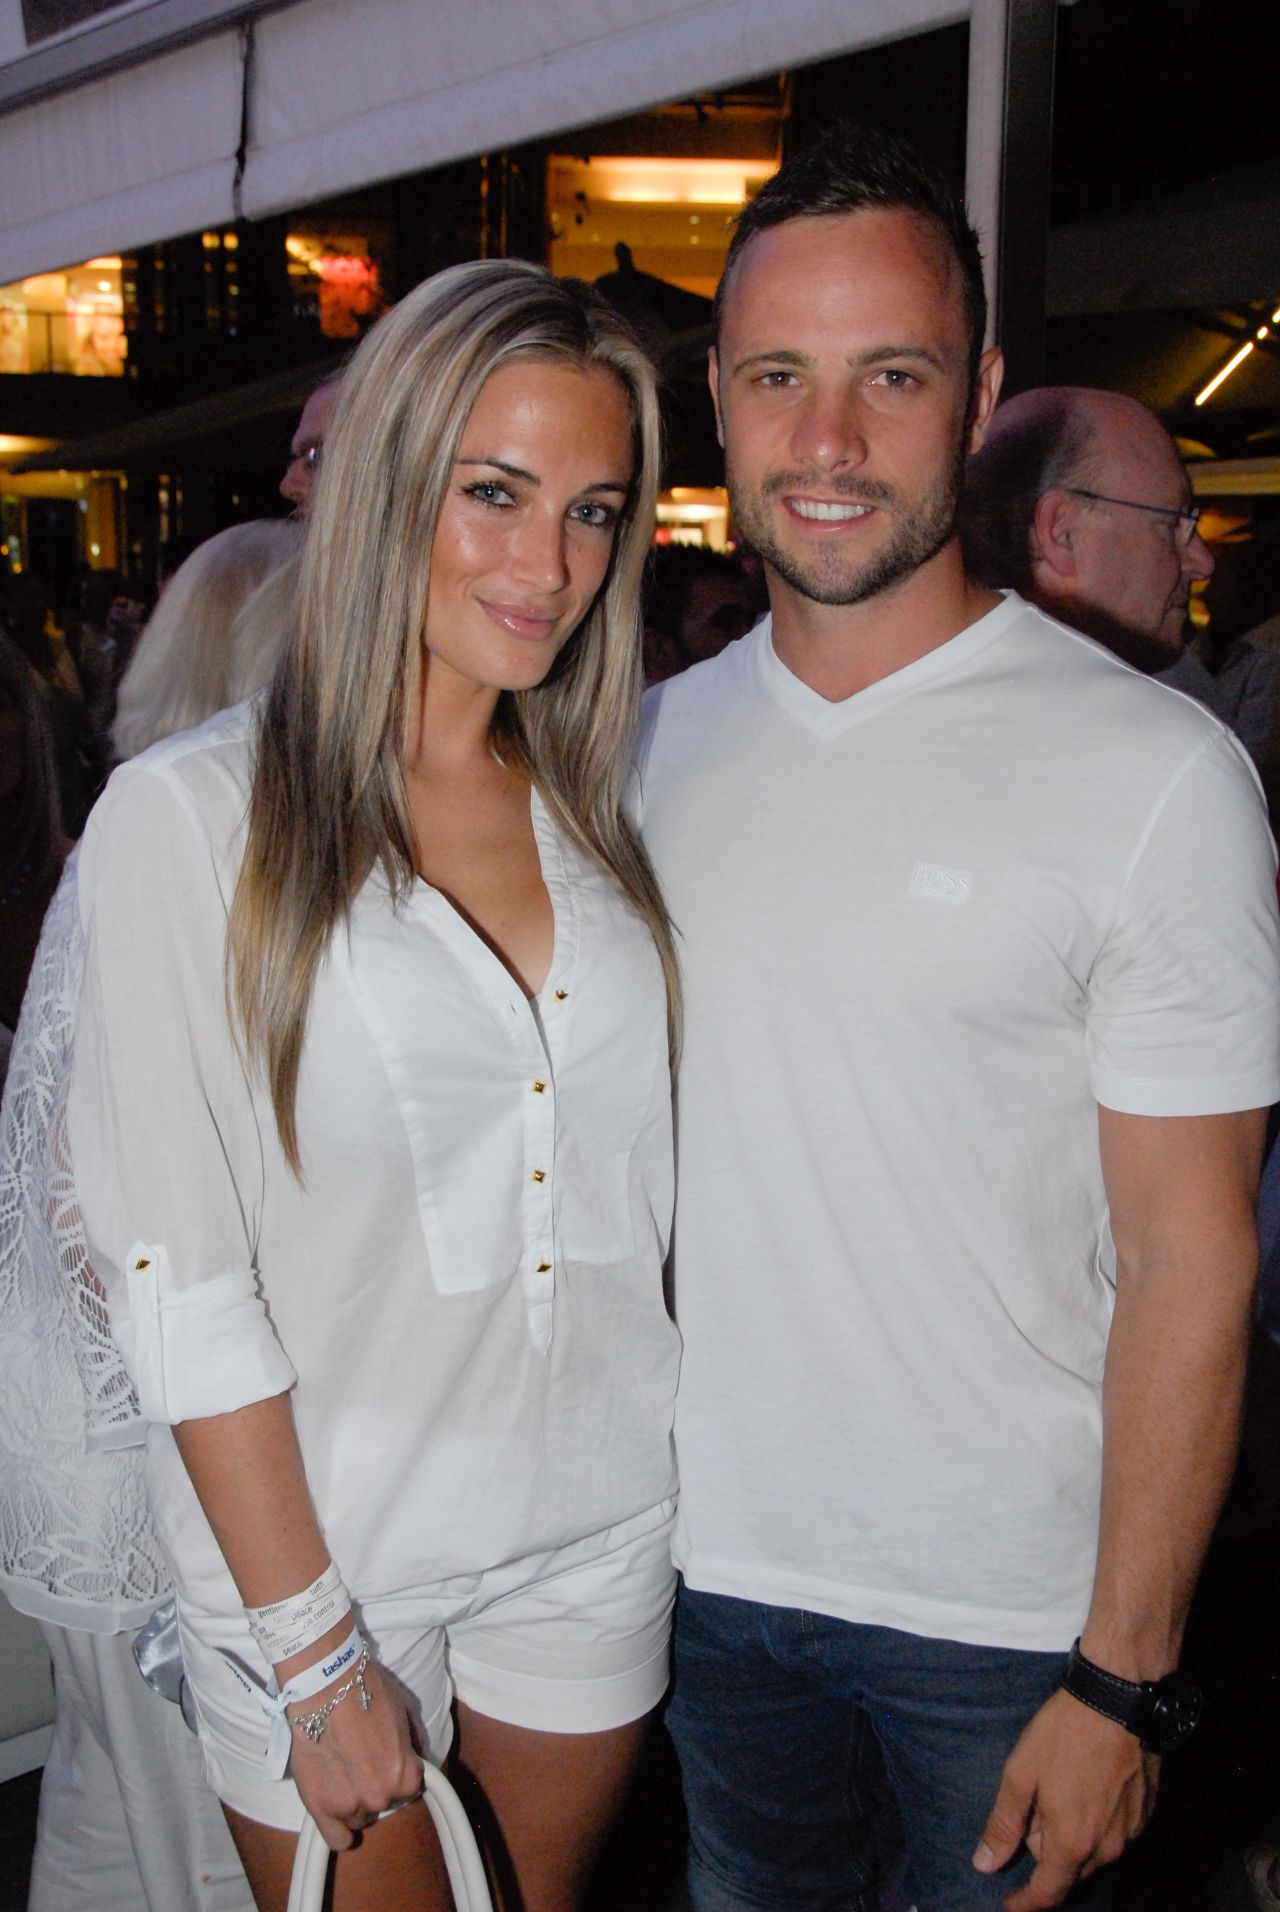 A picture taken on January 26, 2013, shows Pistorius and Steenkamp at Melrose Arch in Johannesburg. Pistorius said her shooting death was an accident after he mistook her for an intruder. The prosecution called it a deliberate act after the two had an argument.